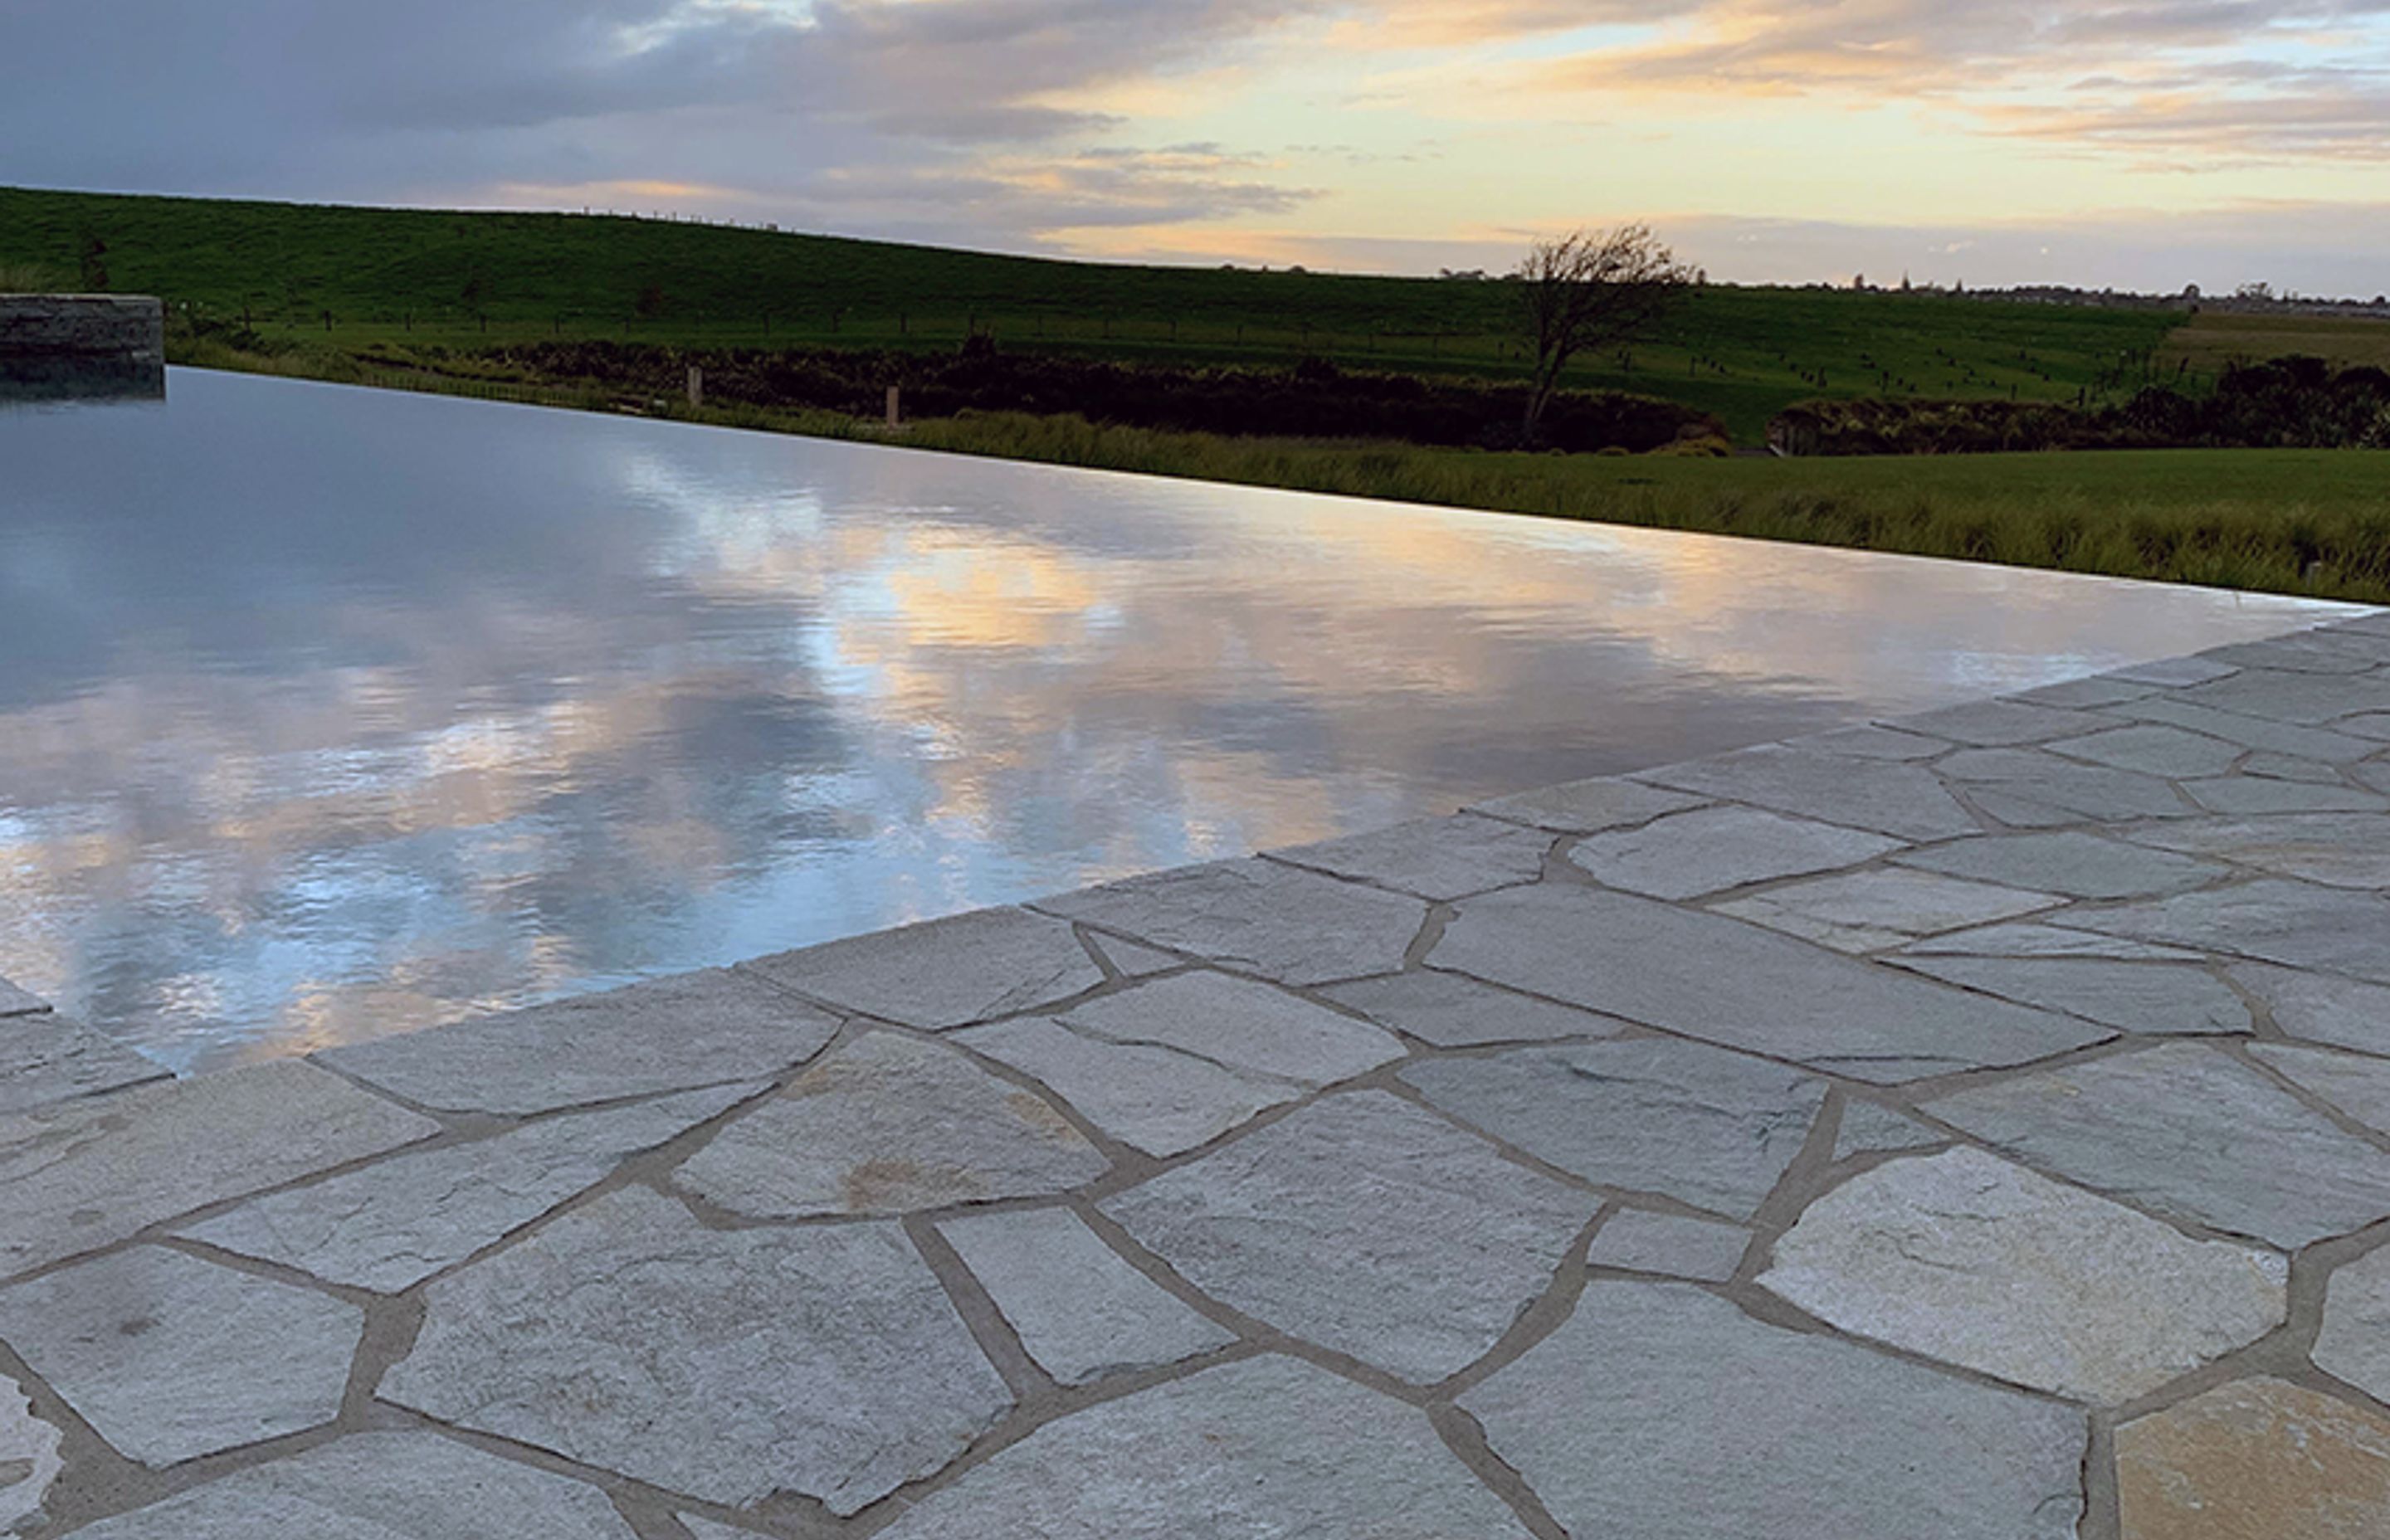 Being highly durable, Kavala polygonal slate paving is an ideal choice in harsh climatic conditions, especially freeze-thaw cycles. Available in a range of sizes and thicknesses, it is an extremely versatile paving product.